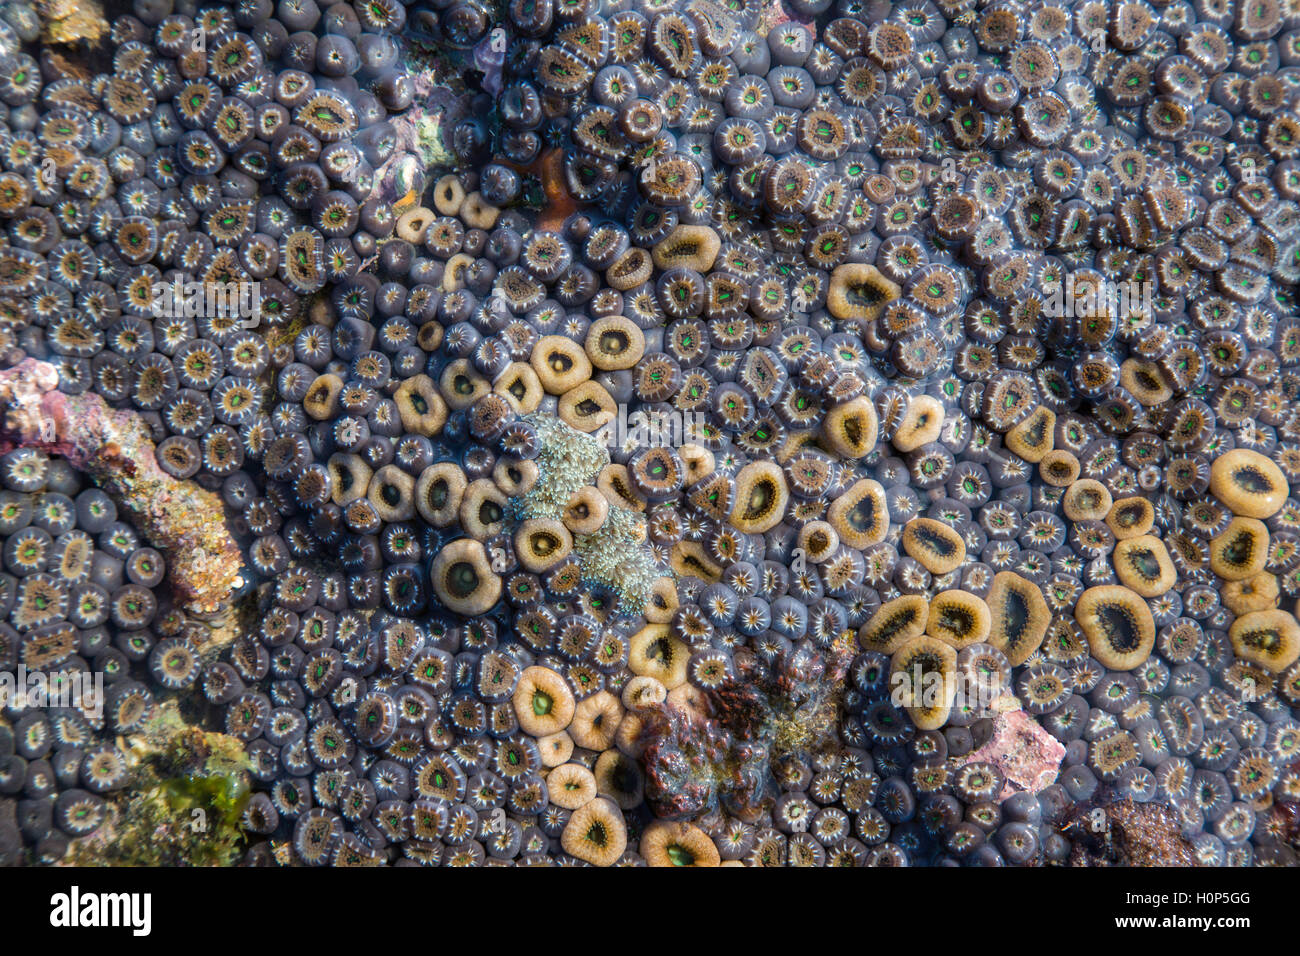 Closeup of Zoanthids on the rocks in the inter-tidal zone in the vicinity of Xai Xai, Mozambique Stock Photo